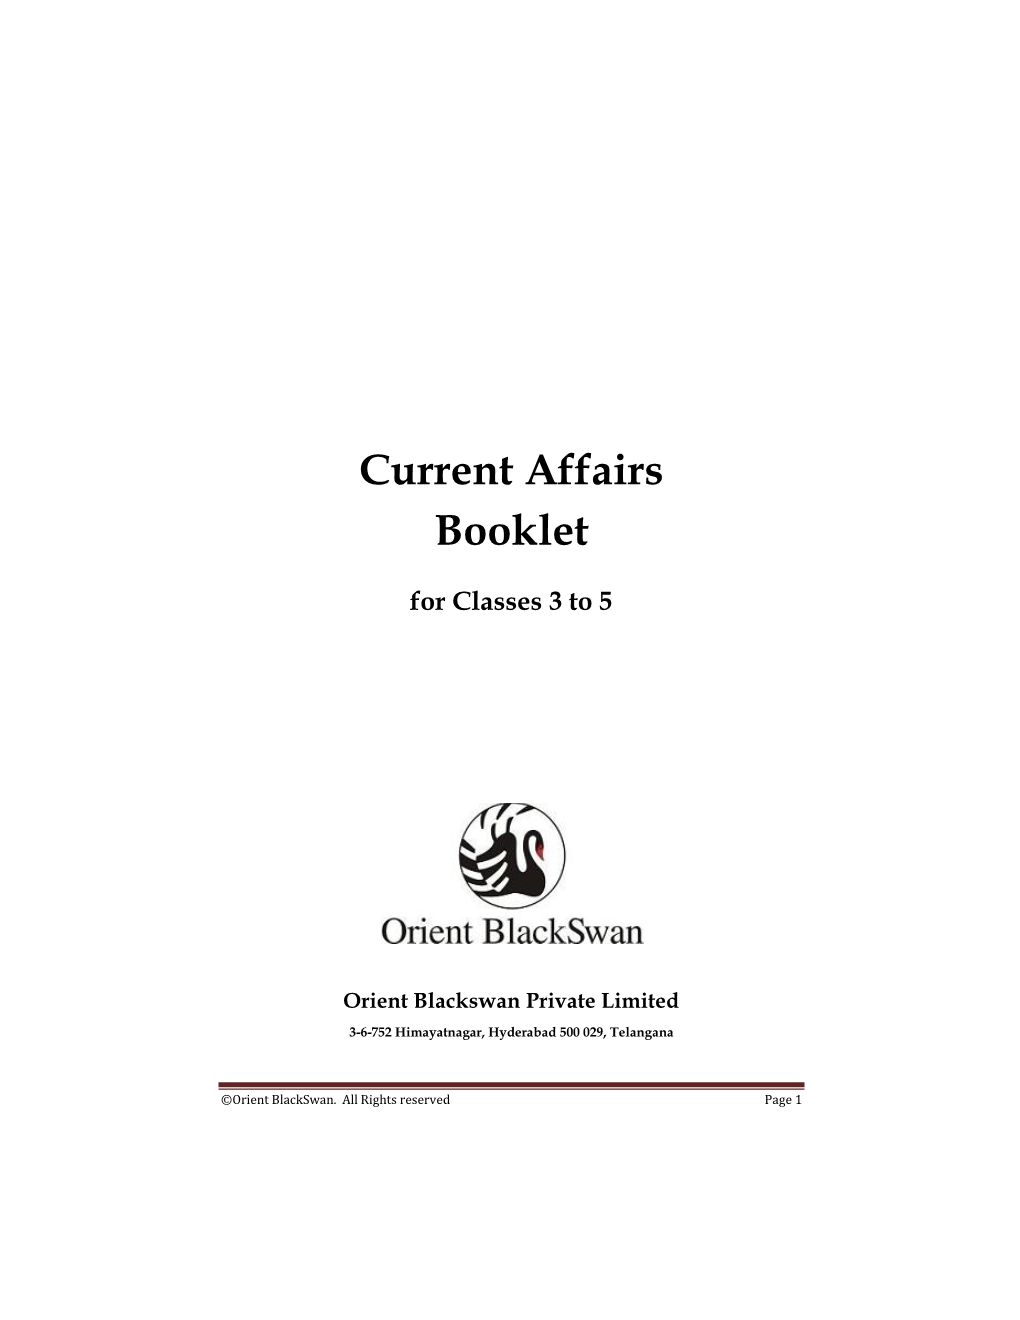 Current Affairs Booklet